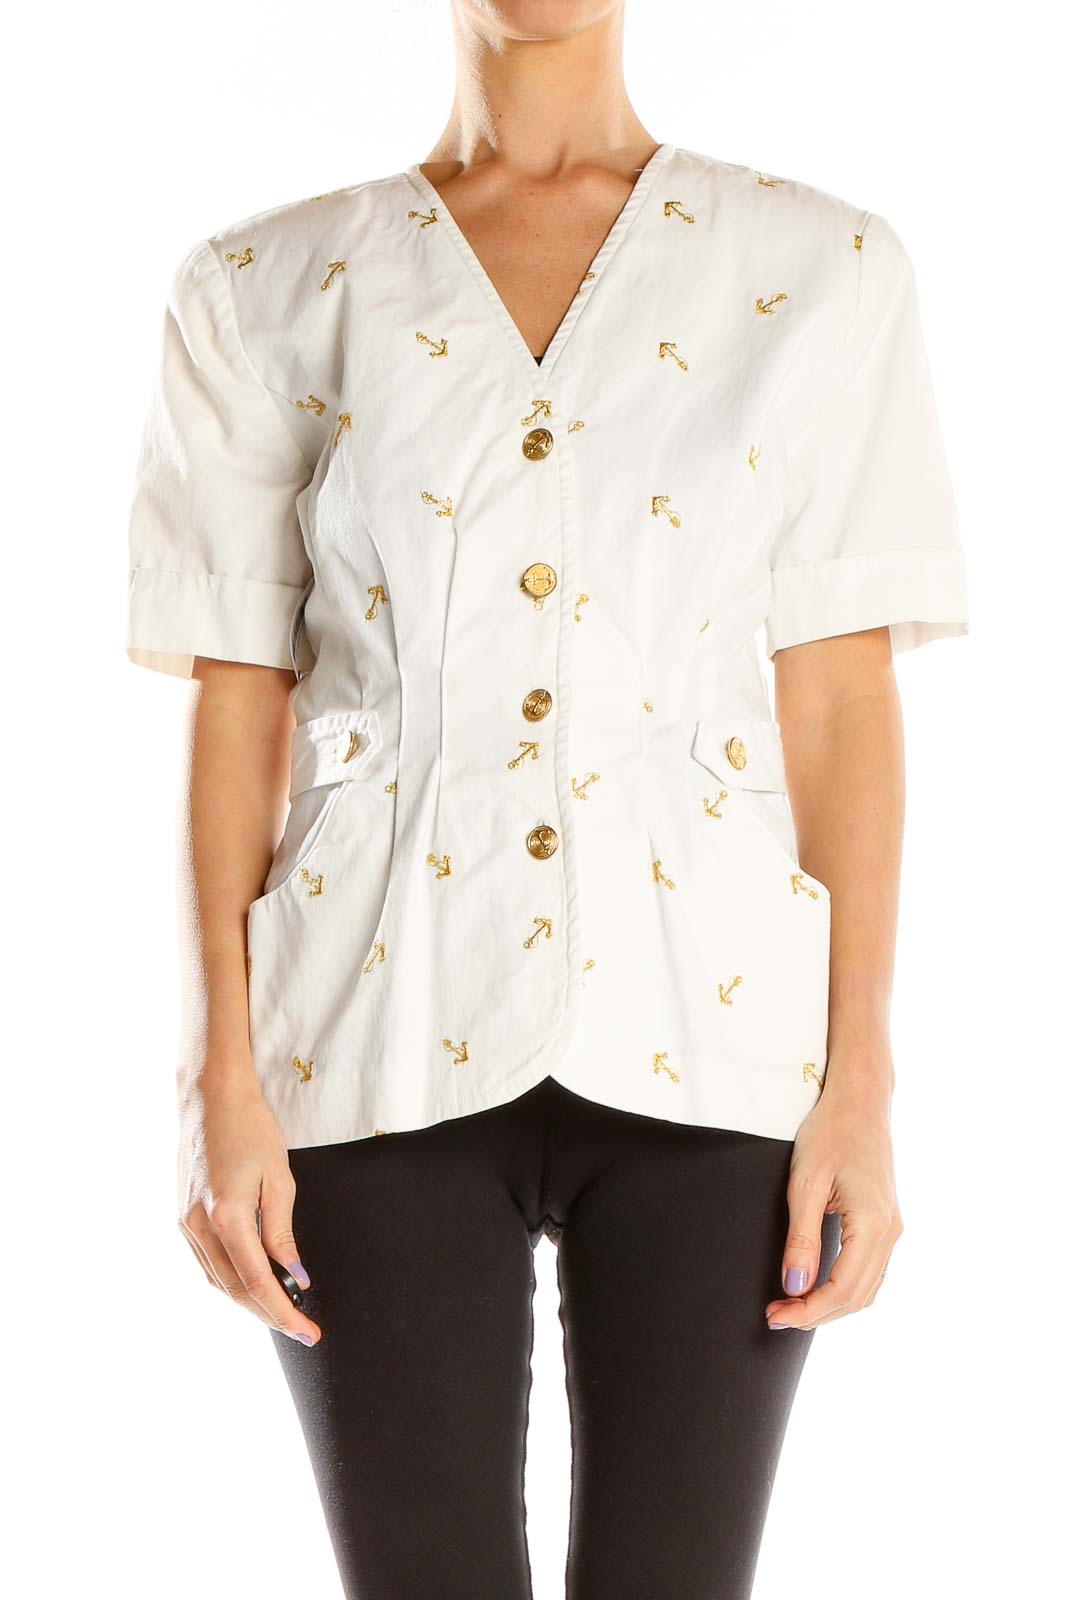 White Vintage Gold Embroidered Top Front